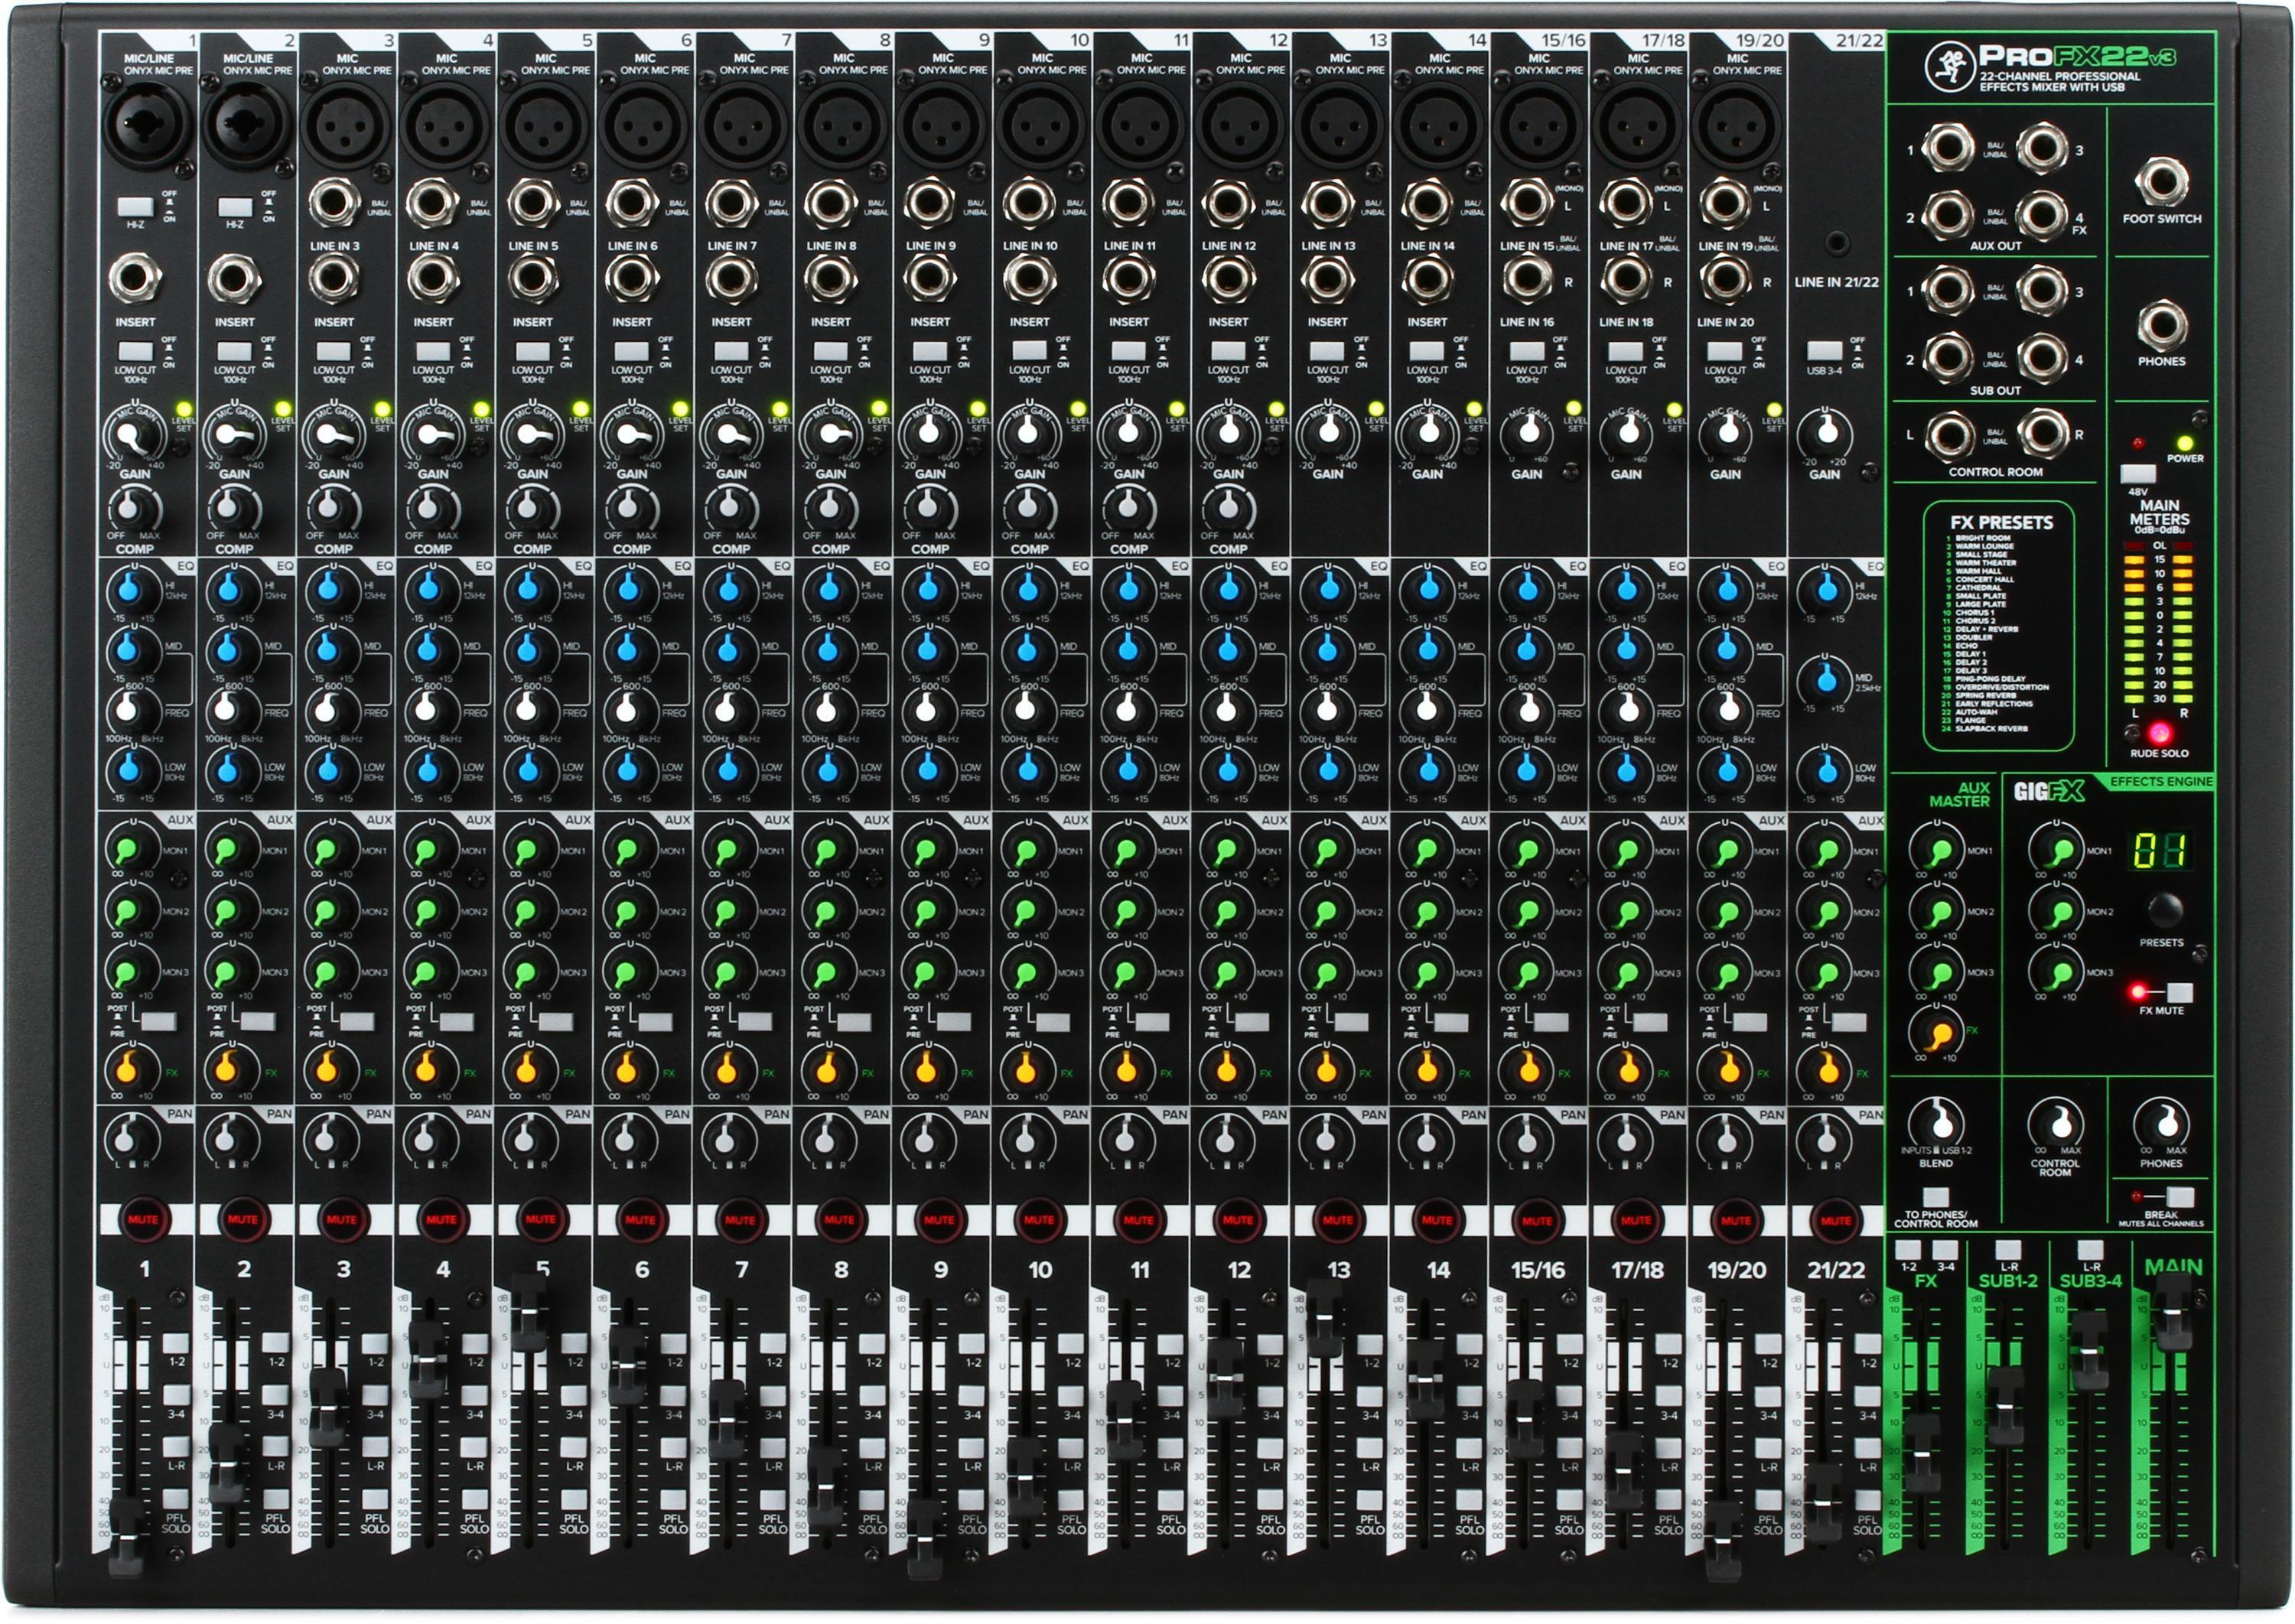 Bundled Item: Mackie ProFX22v3 22-channel Mixer with USB and Effects